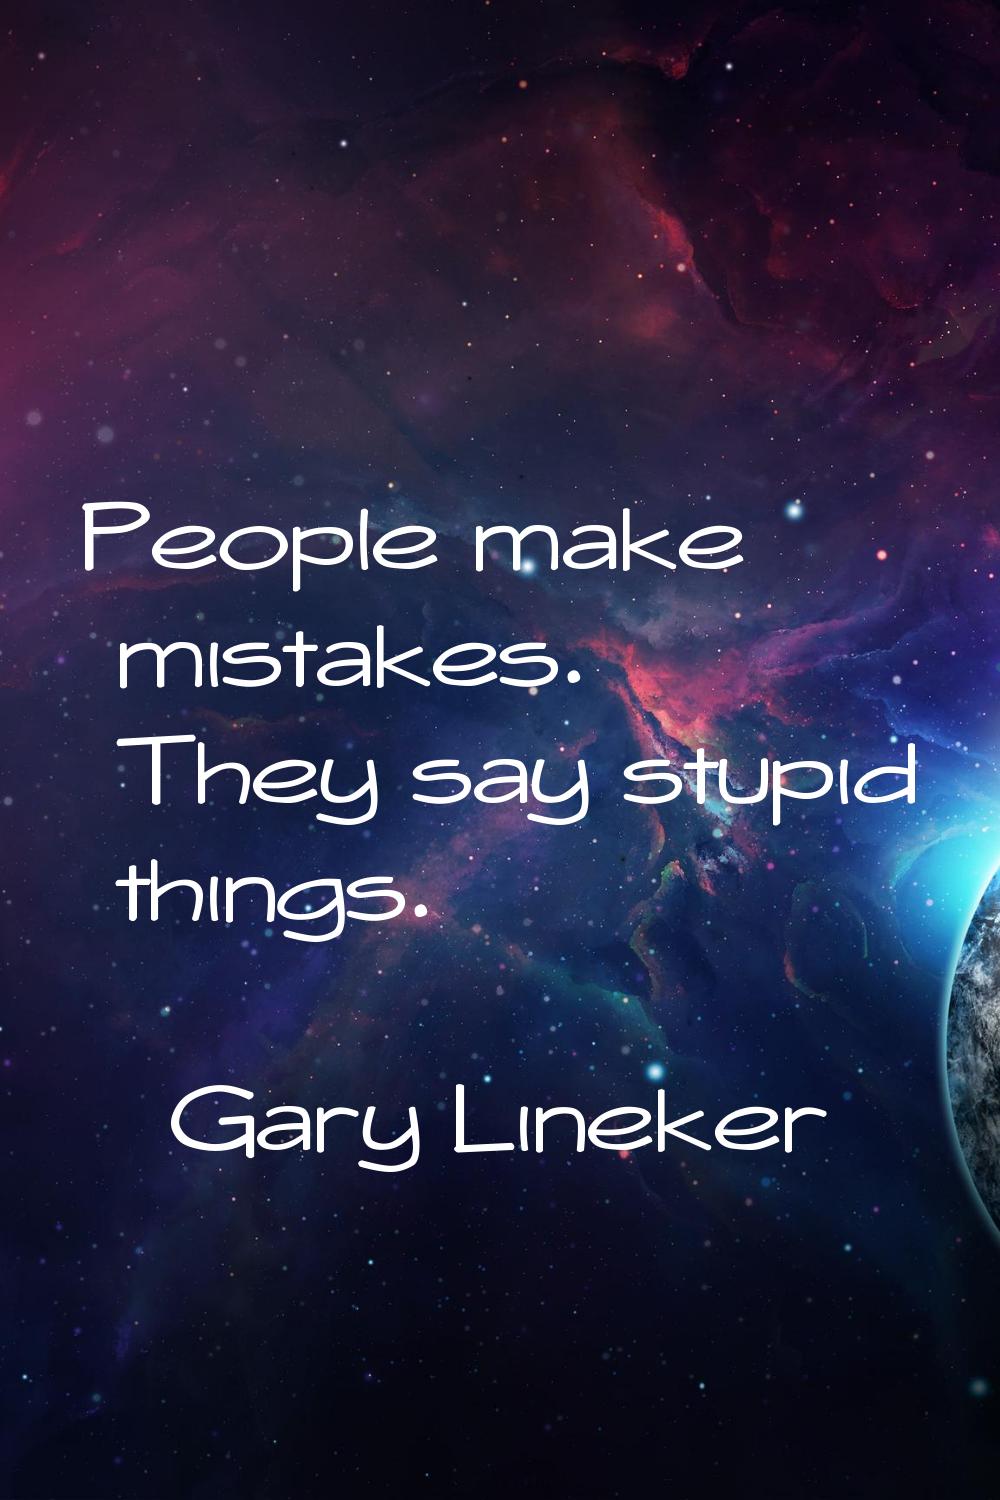 People make mistakes. They say stupid things.